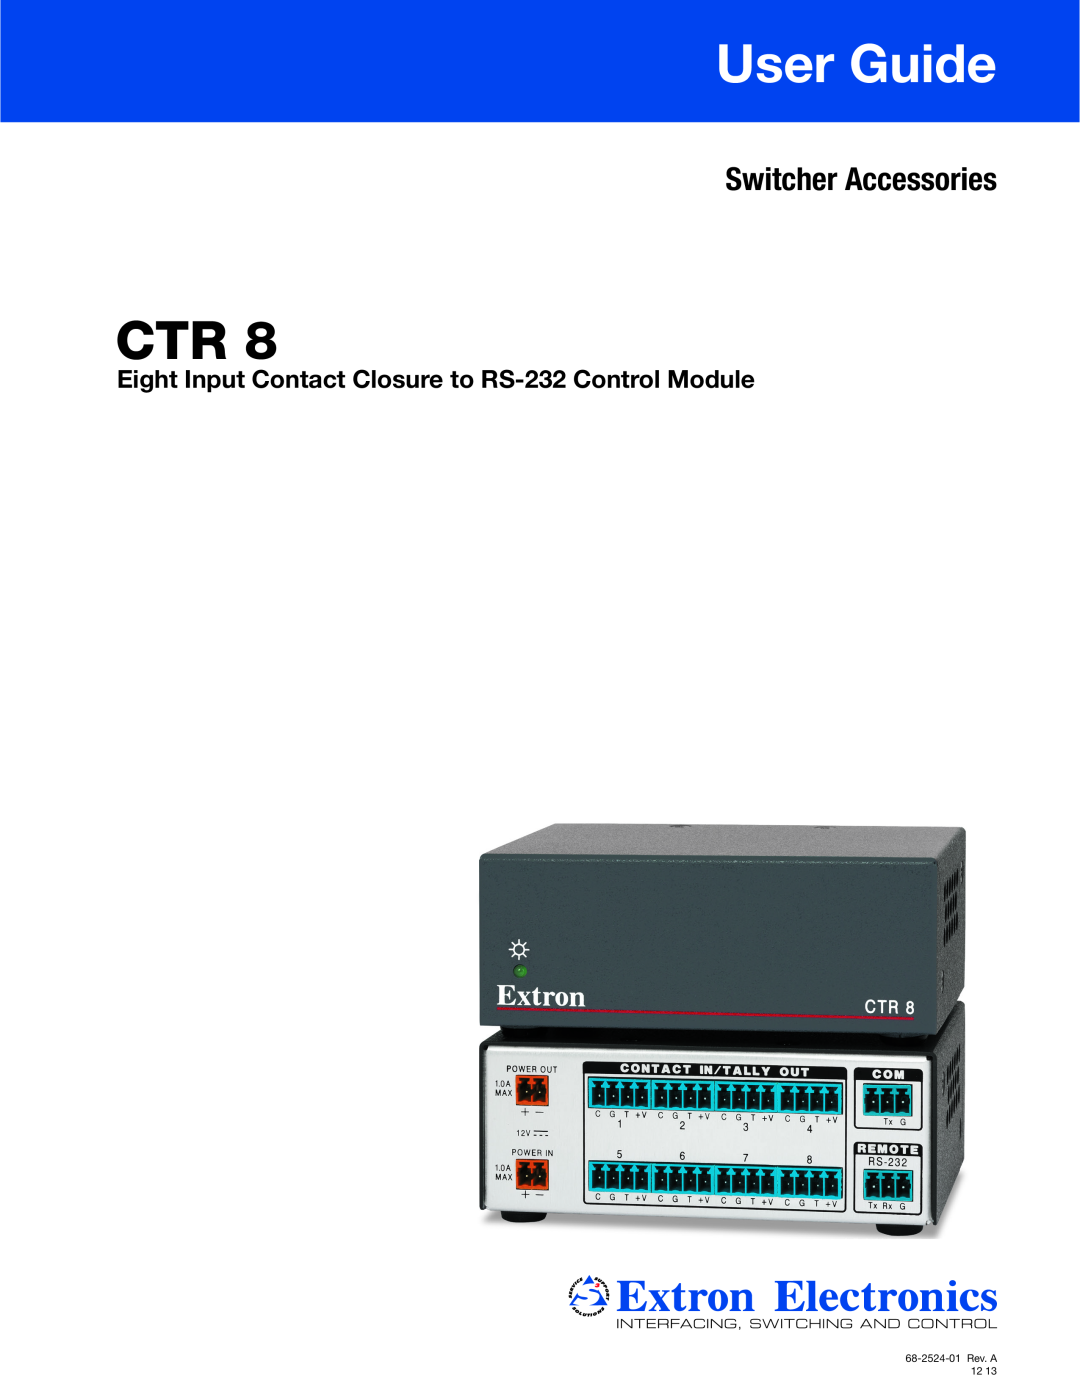 Extron electronic CTR 8 manual User Guide, Switcher Accessories, Eight Input Contact Closure to RS-232 Control Module 